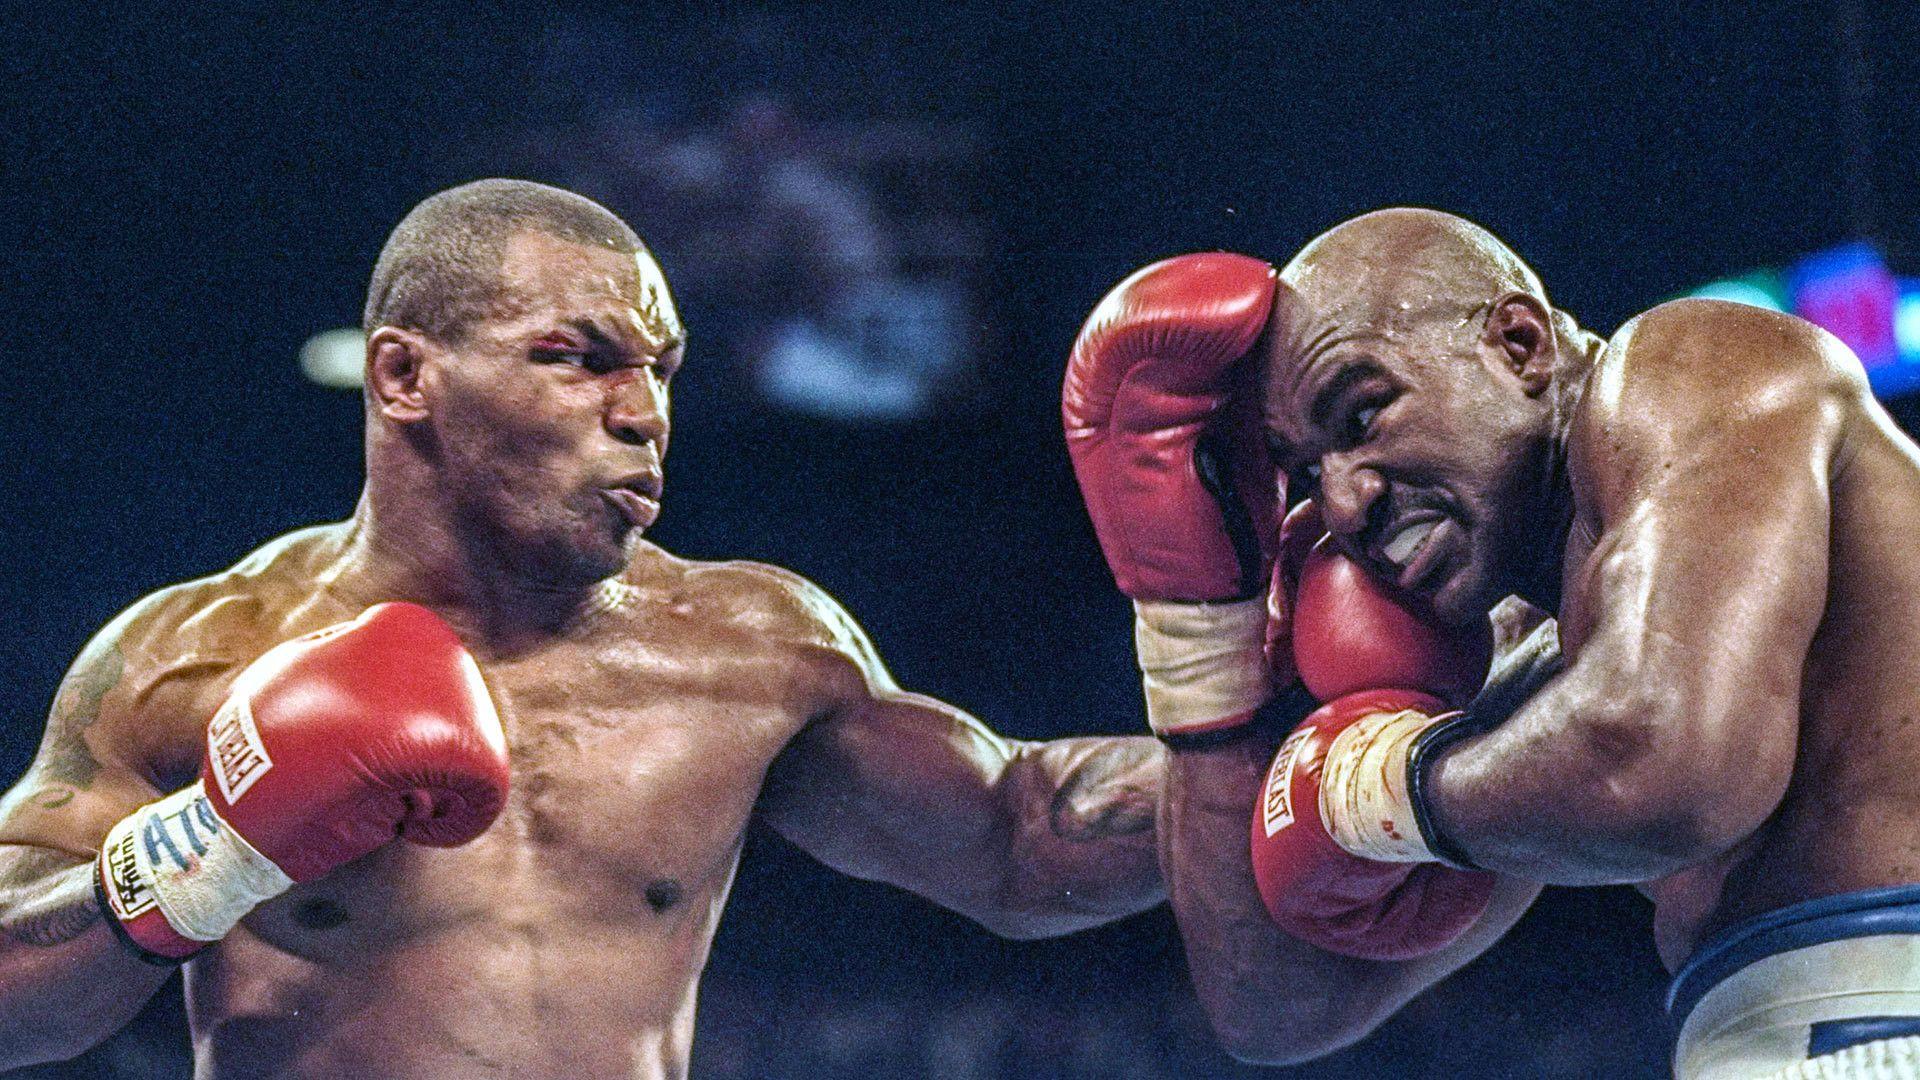 Mike Tyson Wallpaper HD Apk Download for Android- Latest version 1.0-  com.MikeTysonWallpapers.images.pictures.hd.boxing